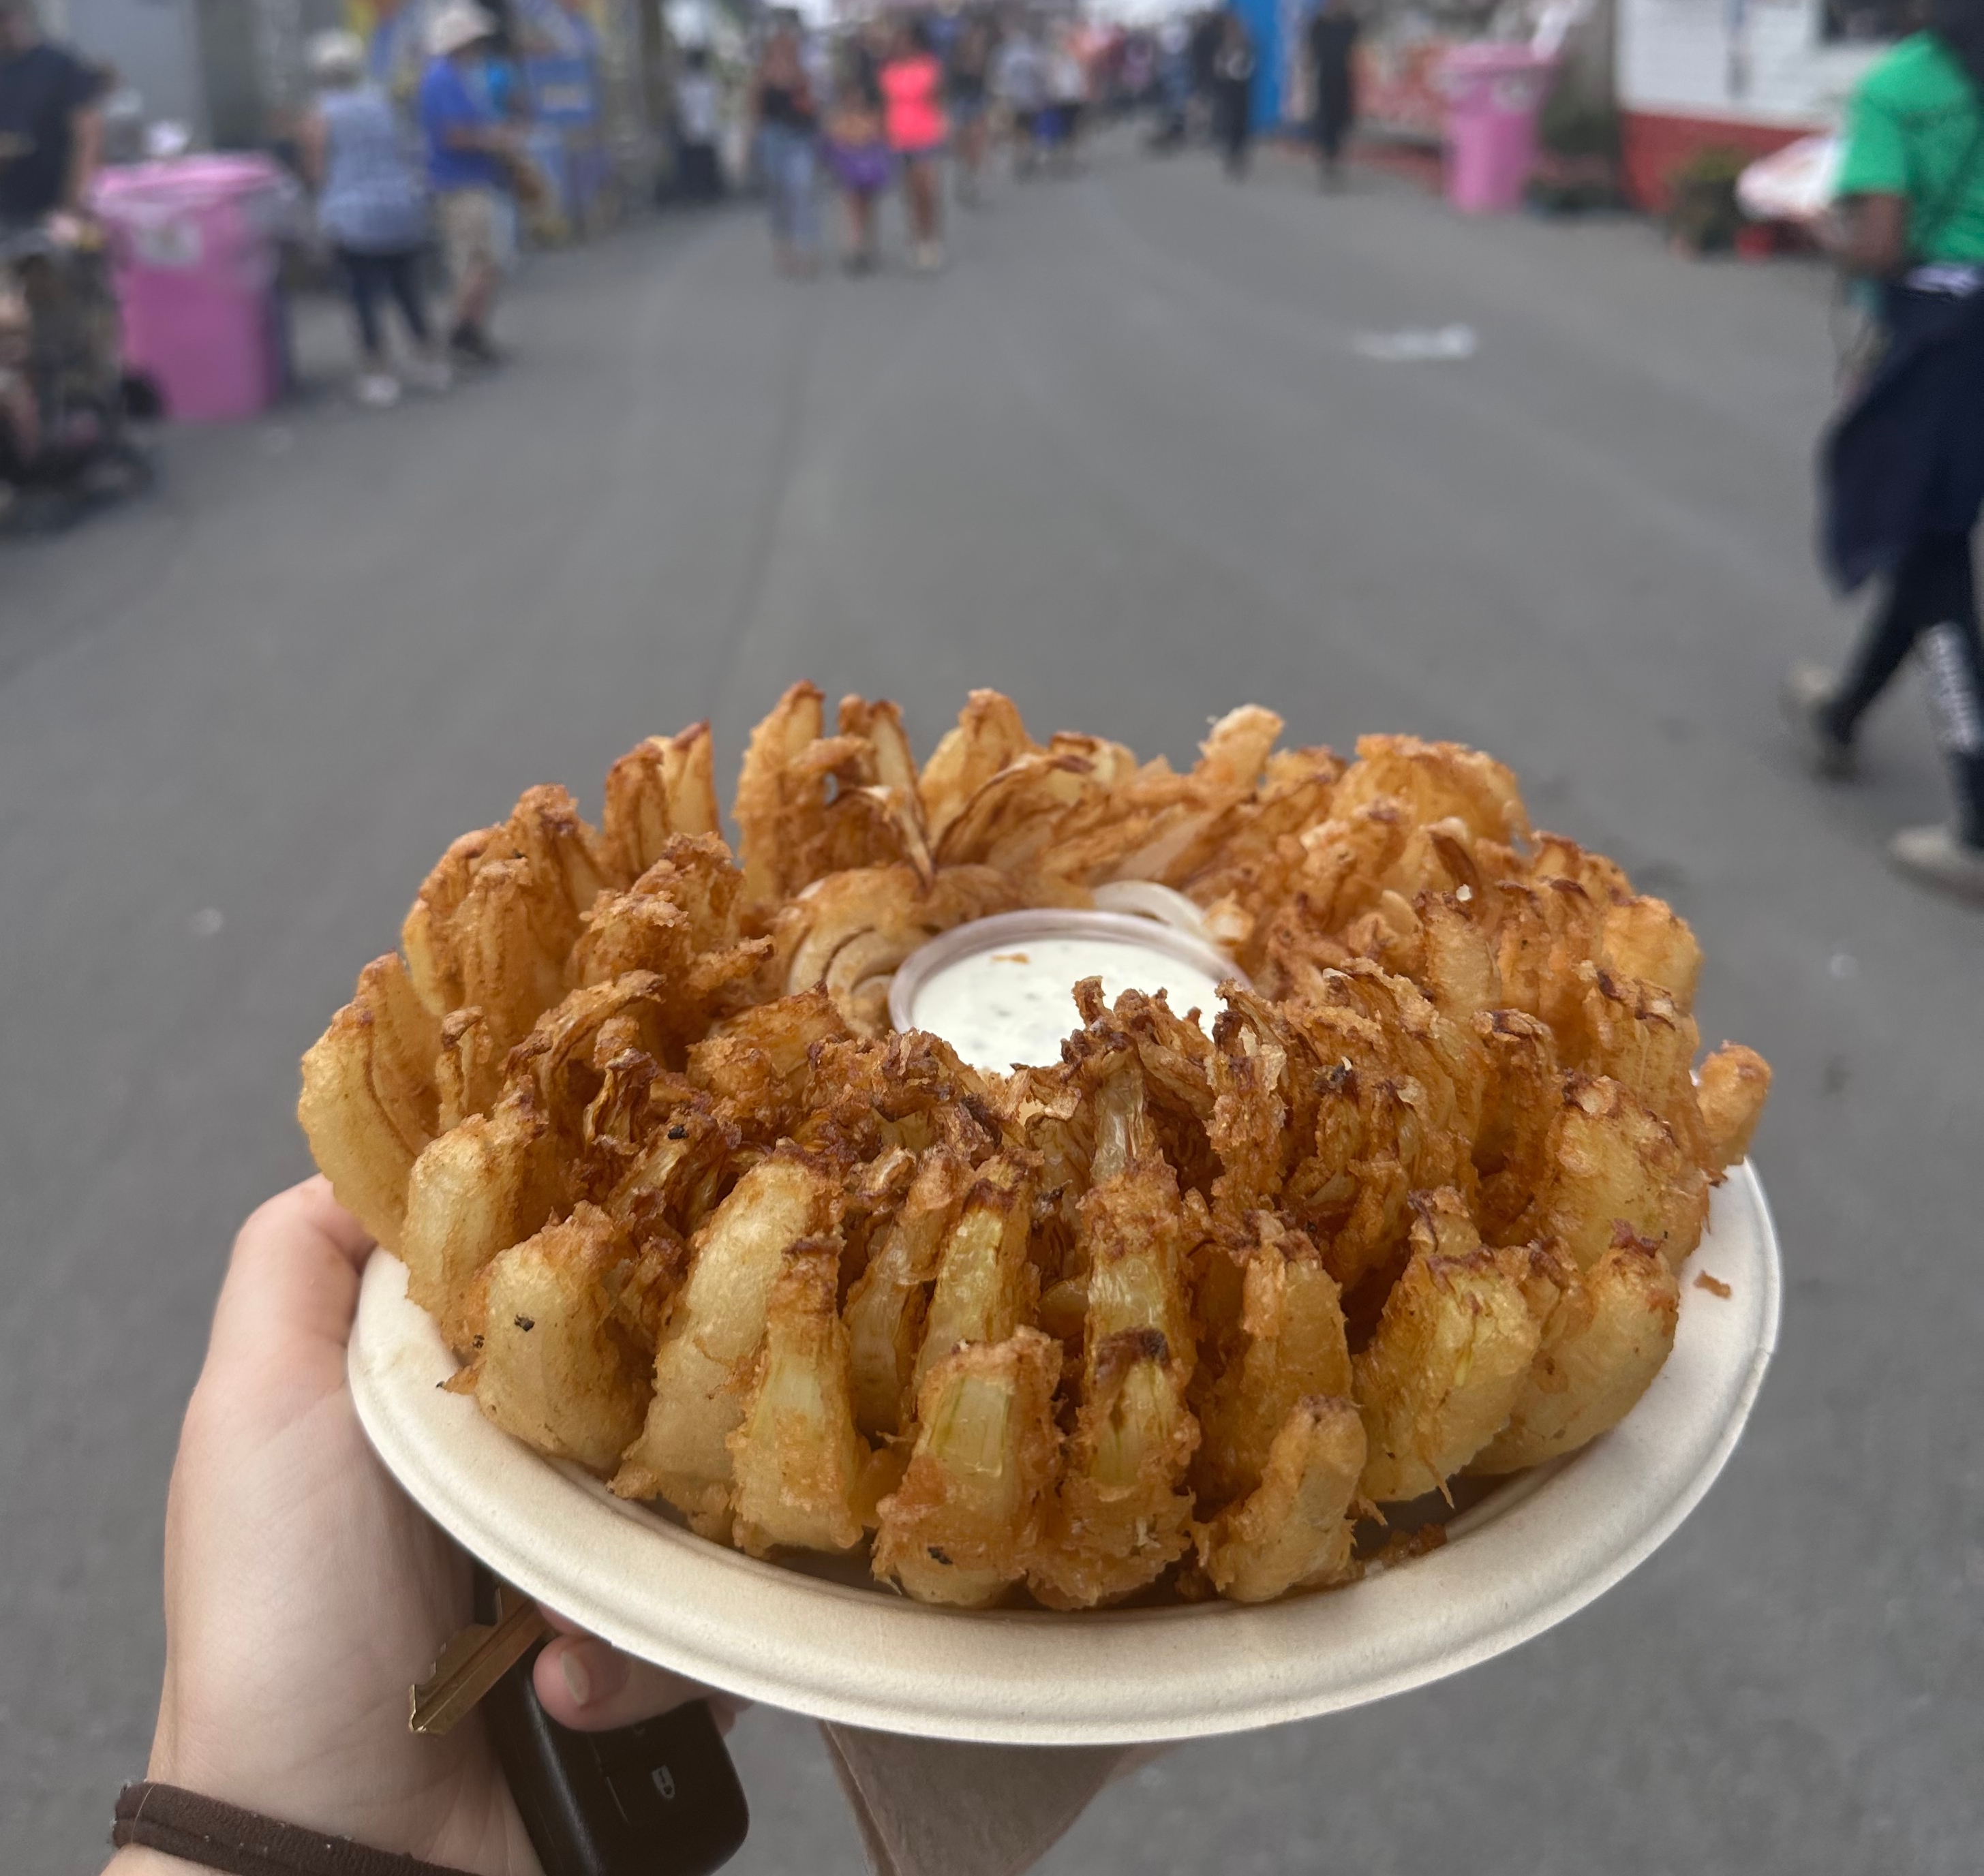 Fried onion at Awesome Onion at the New York State Fair.